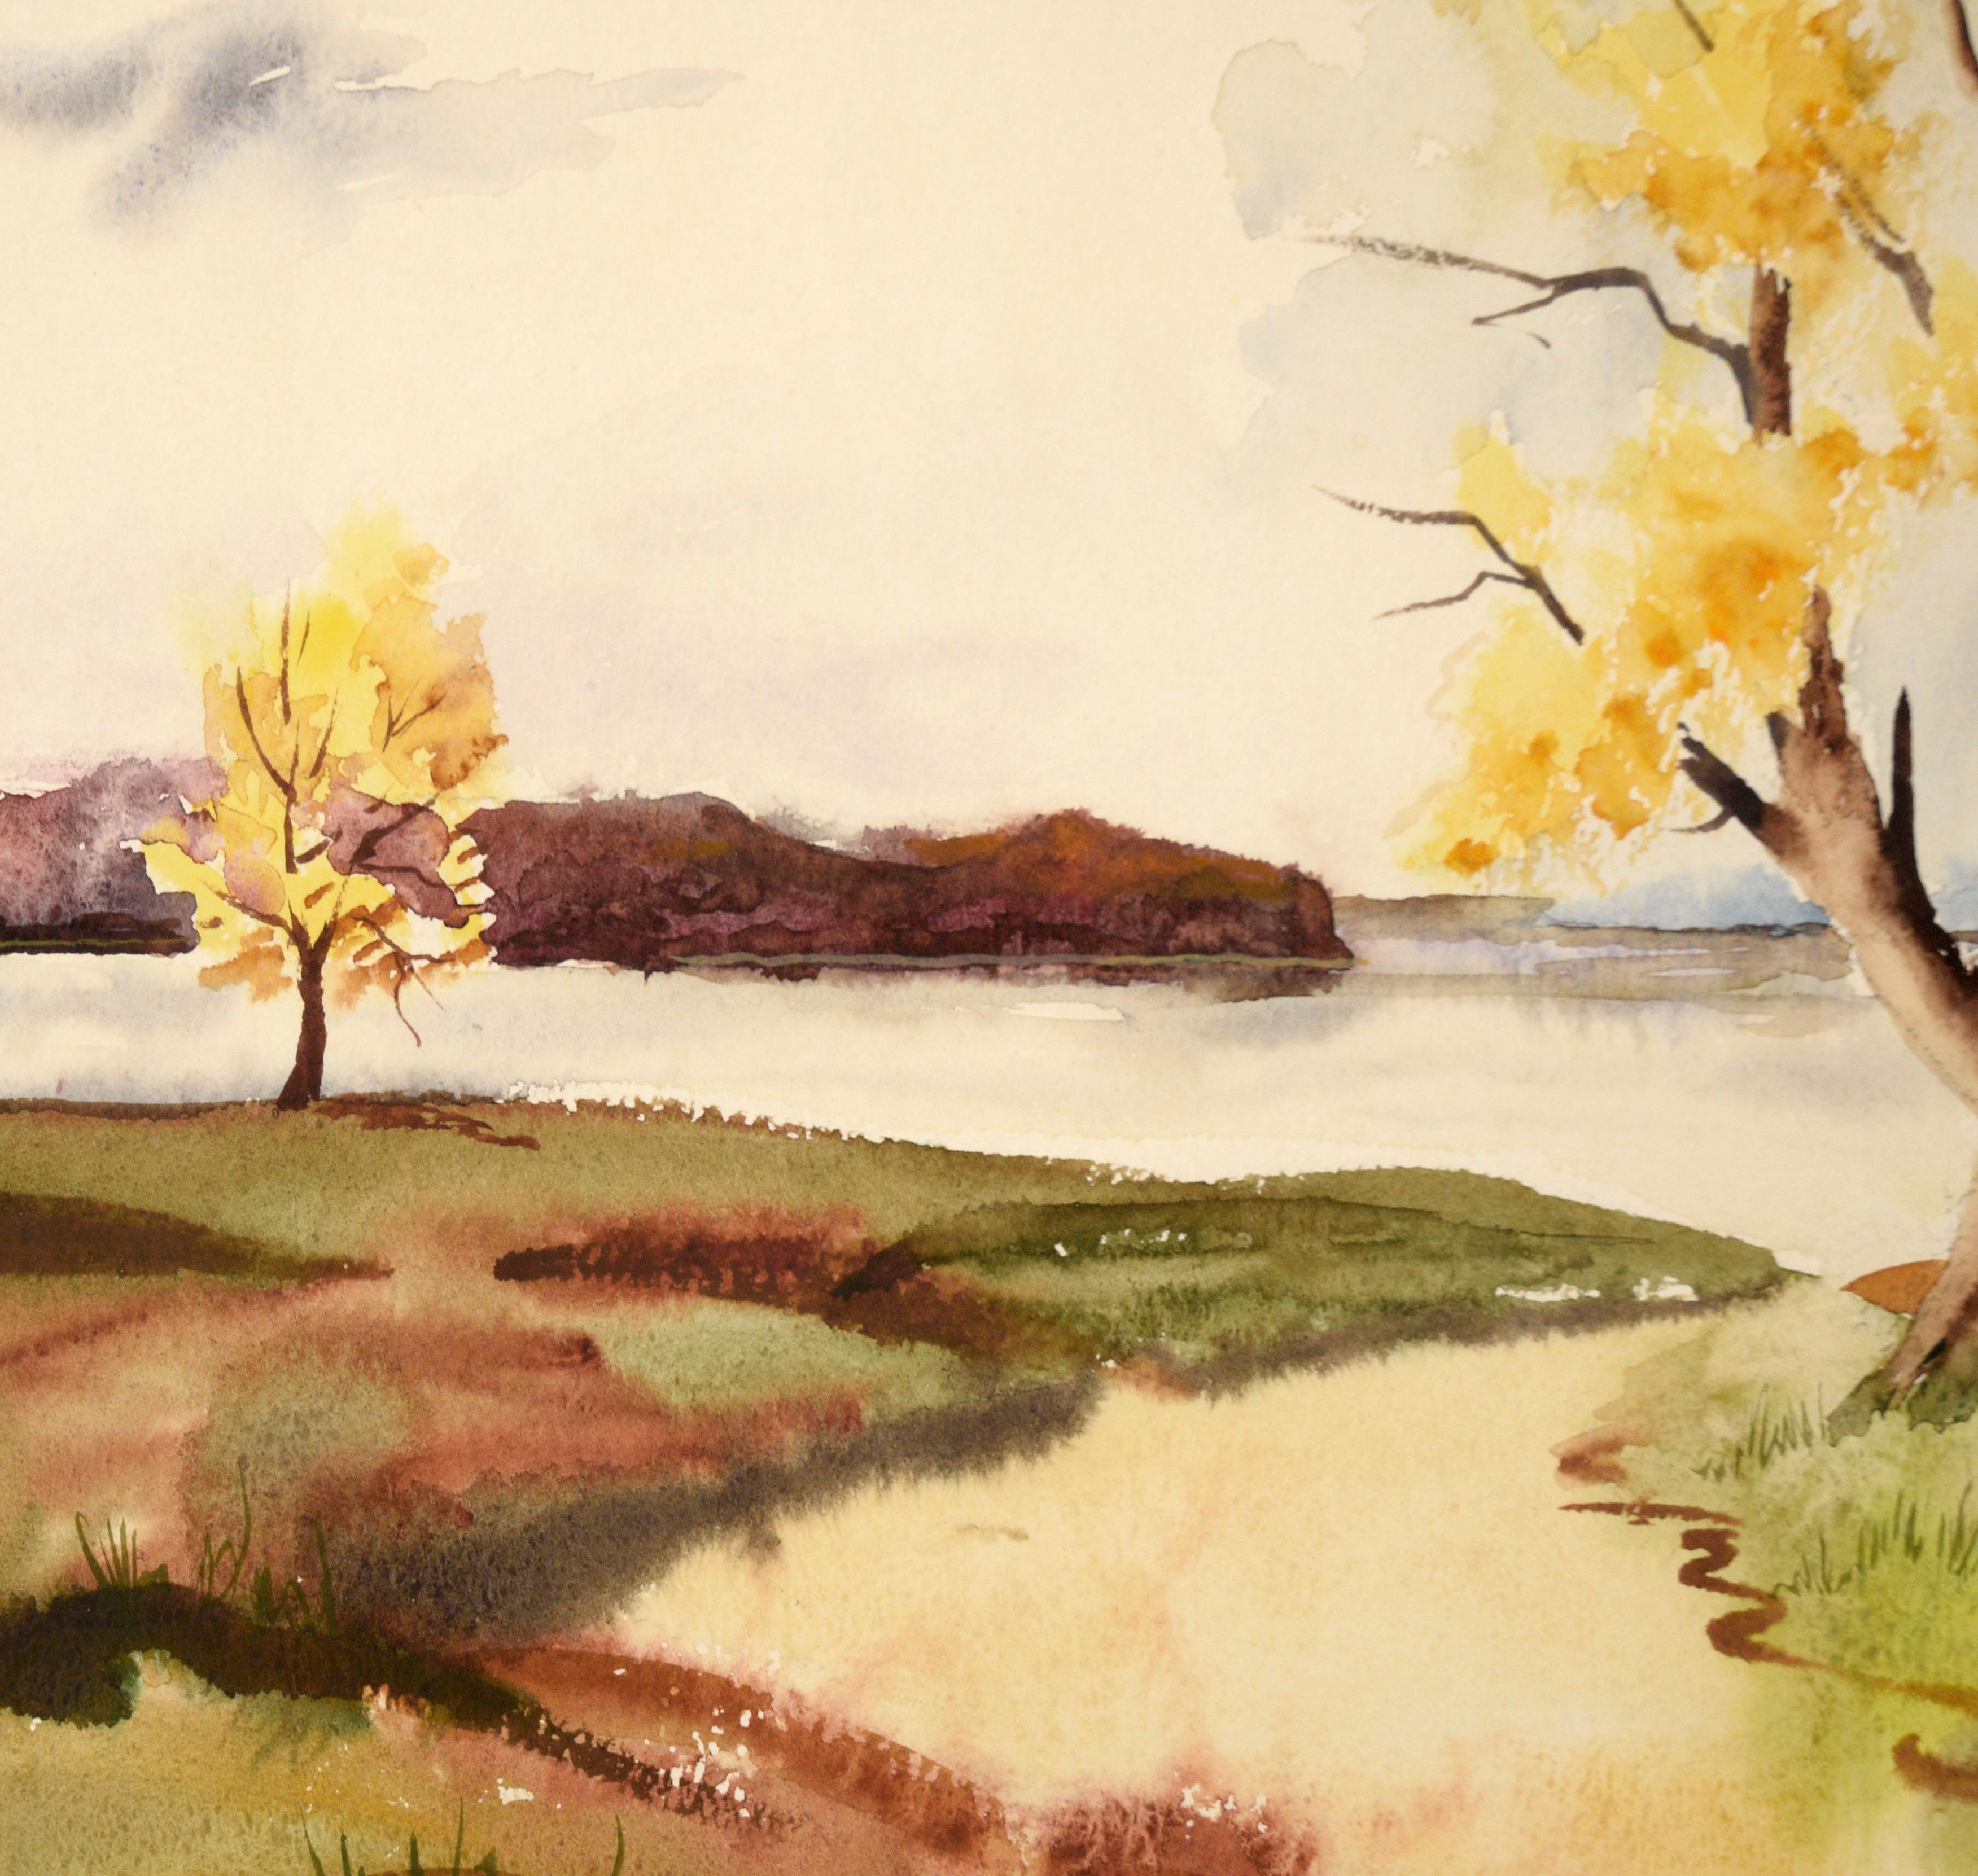 Lake Landscape with Yellow Trees - Watercolor on Paper - American Impressionist Art by Edna Evelyn Sutherland Lewis